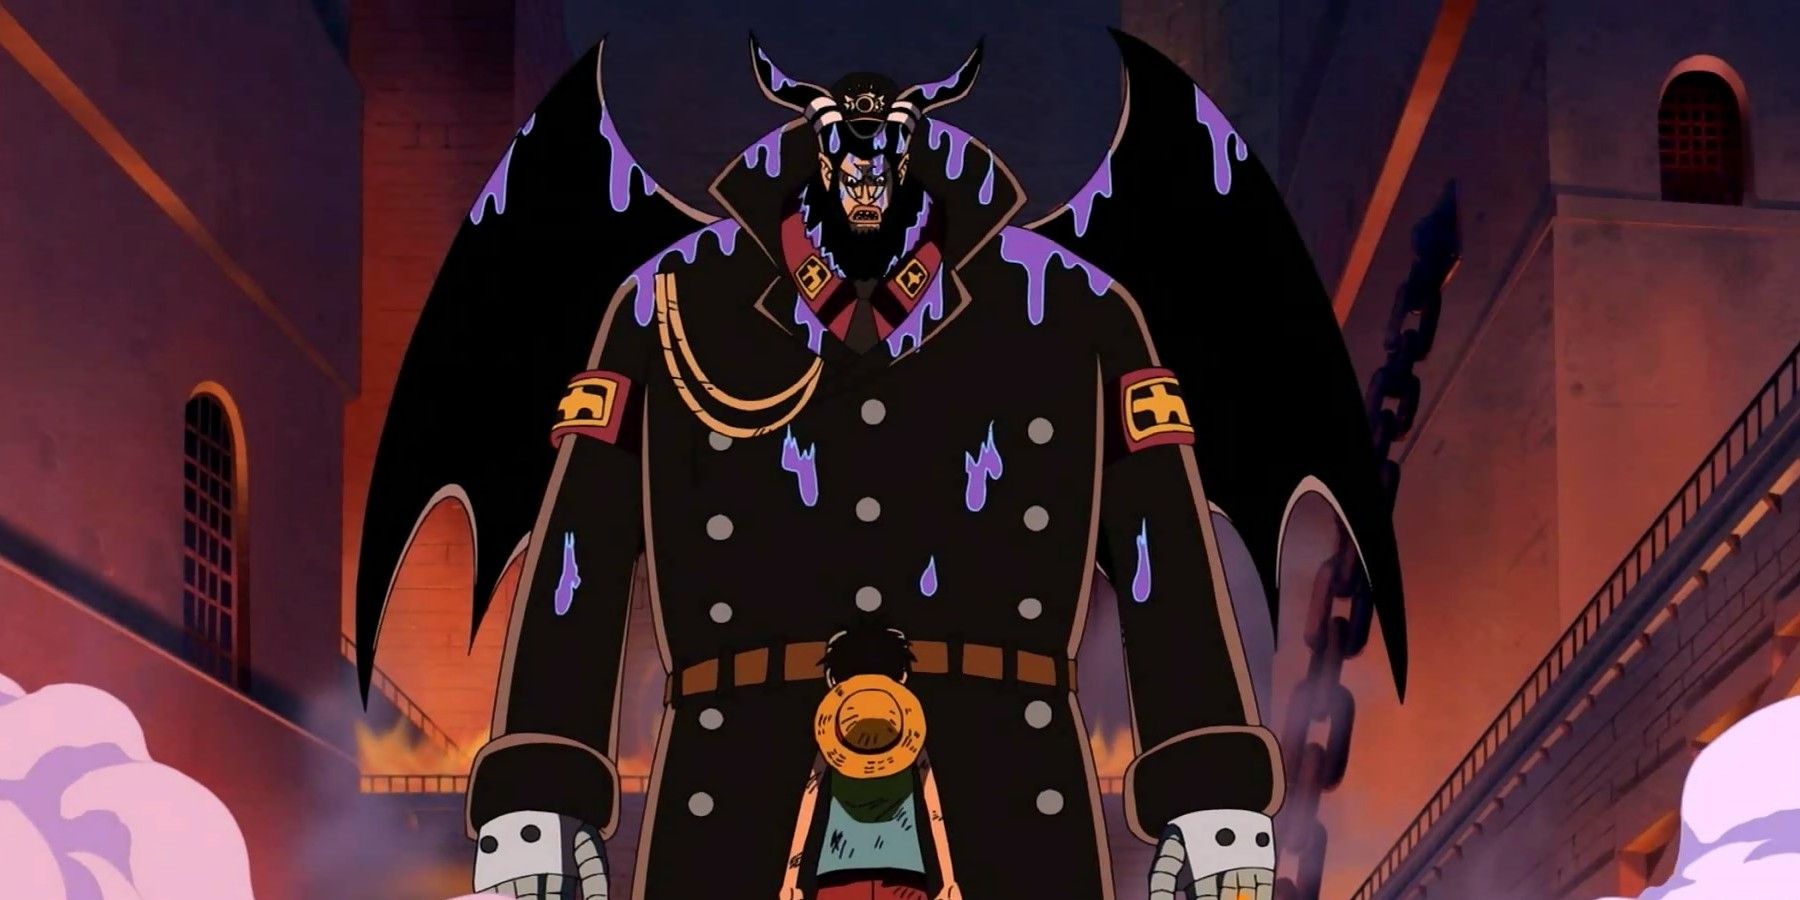 Magellan confronting Monkey D. Luffy during One Piece's Impel Down arc.